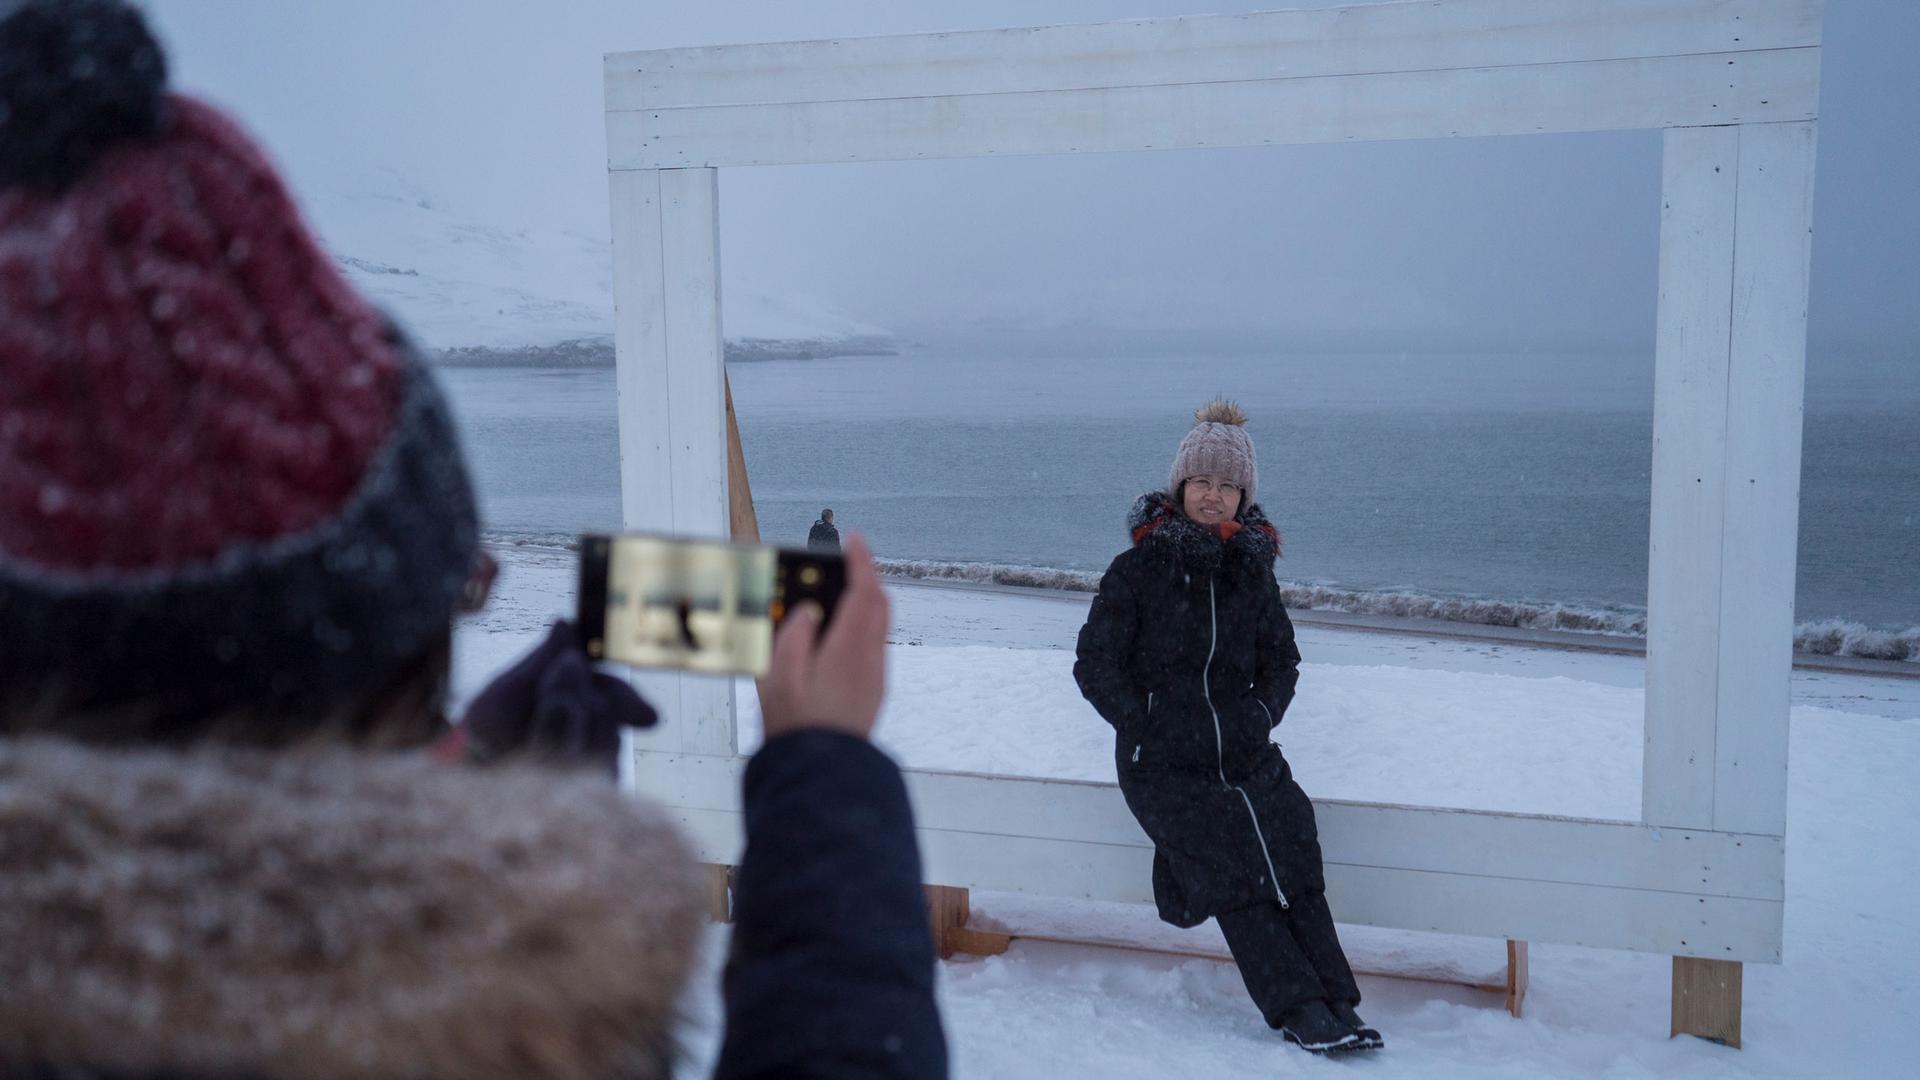 A woman is shown sitting a large frame with the Barents Sea in the background.